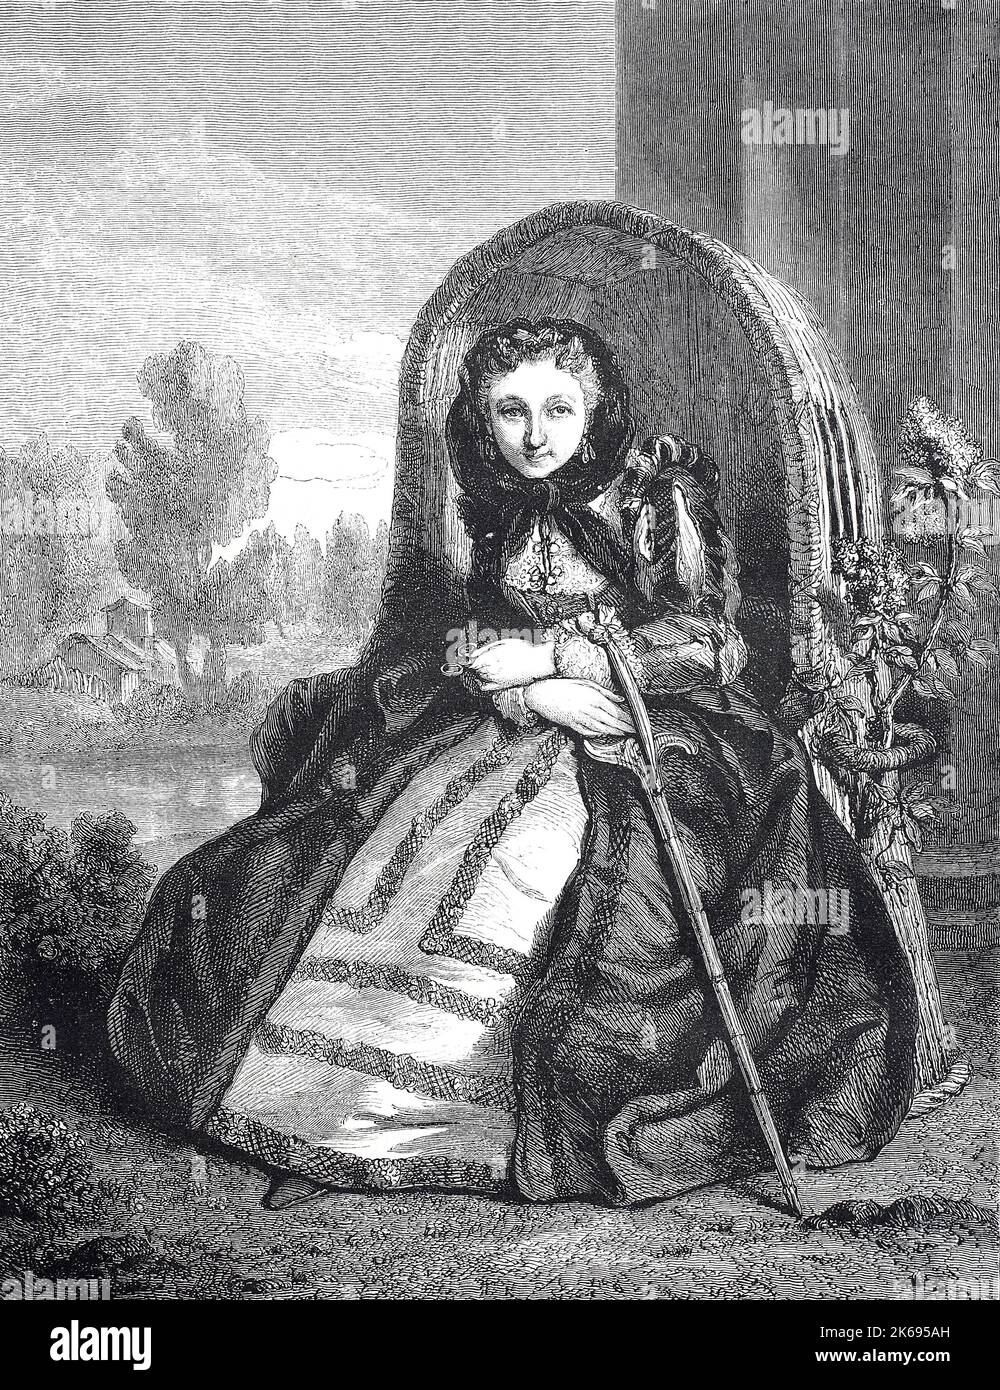 Digital improved reproduction, Young woman in disguise of an old woman in an armchair in the garden, France, original woodprint from th 19th century Stock Photo